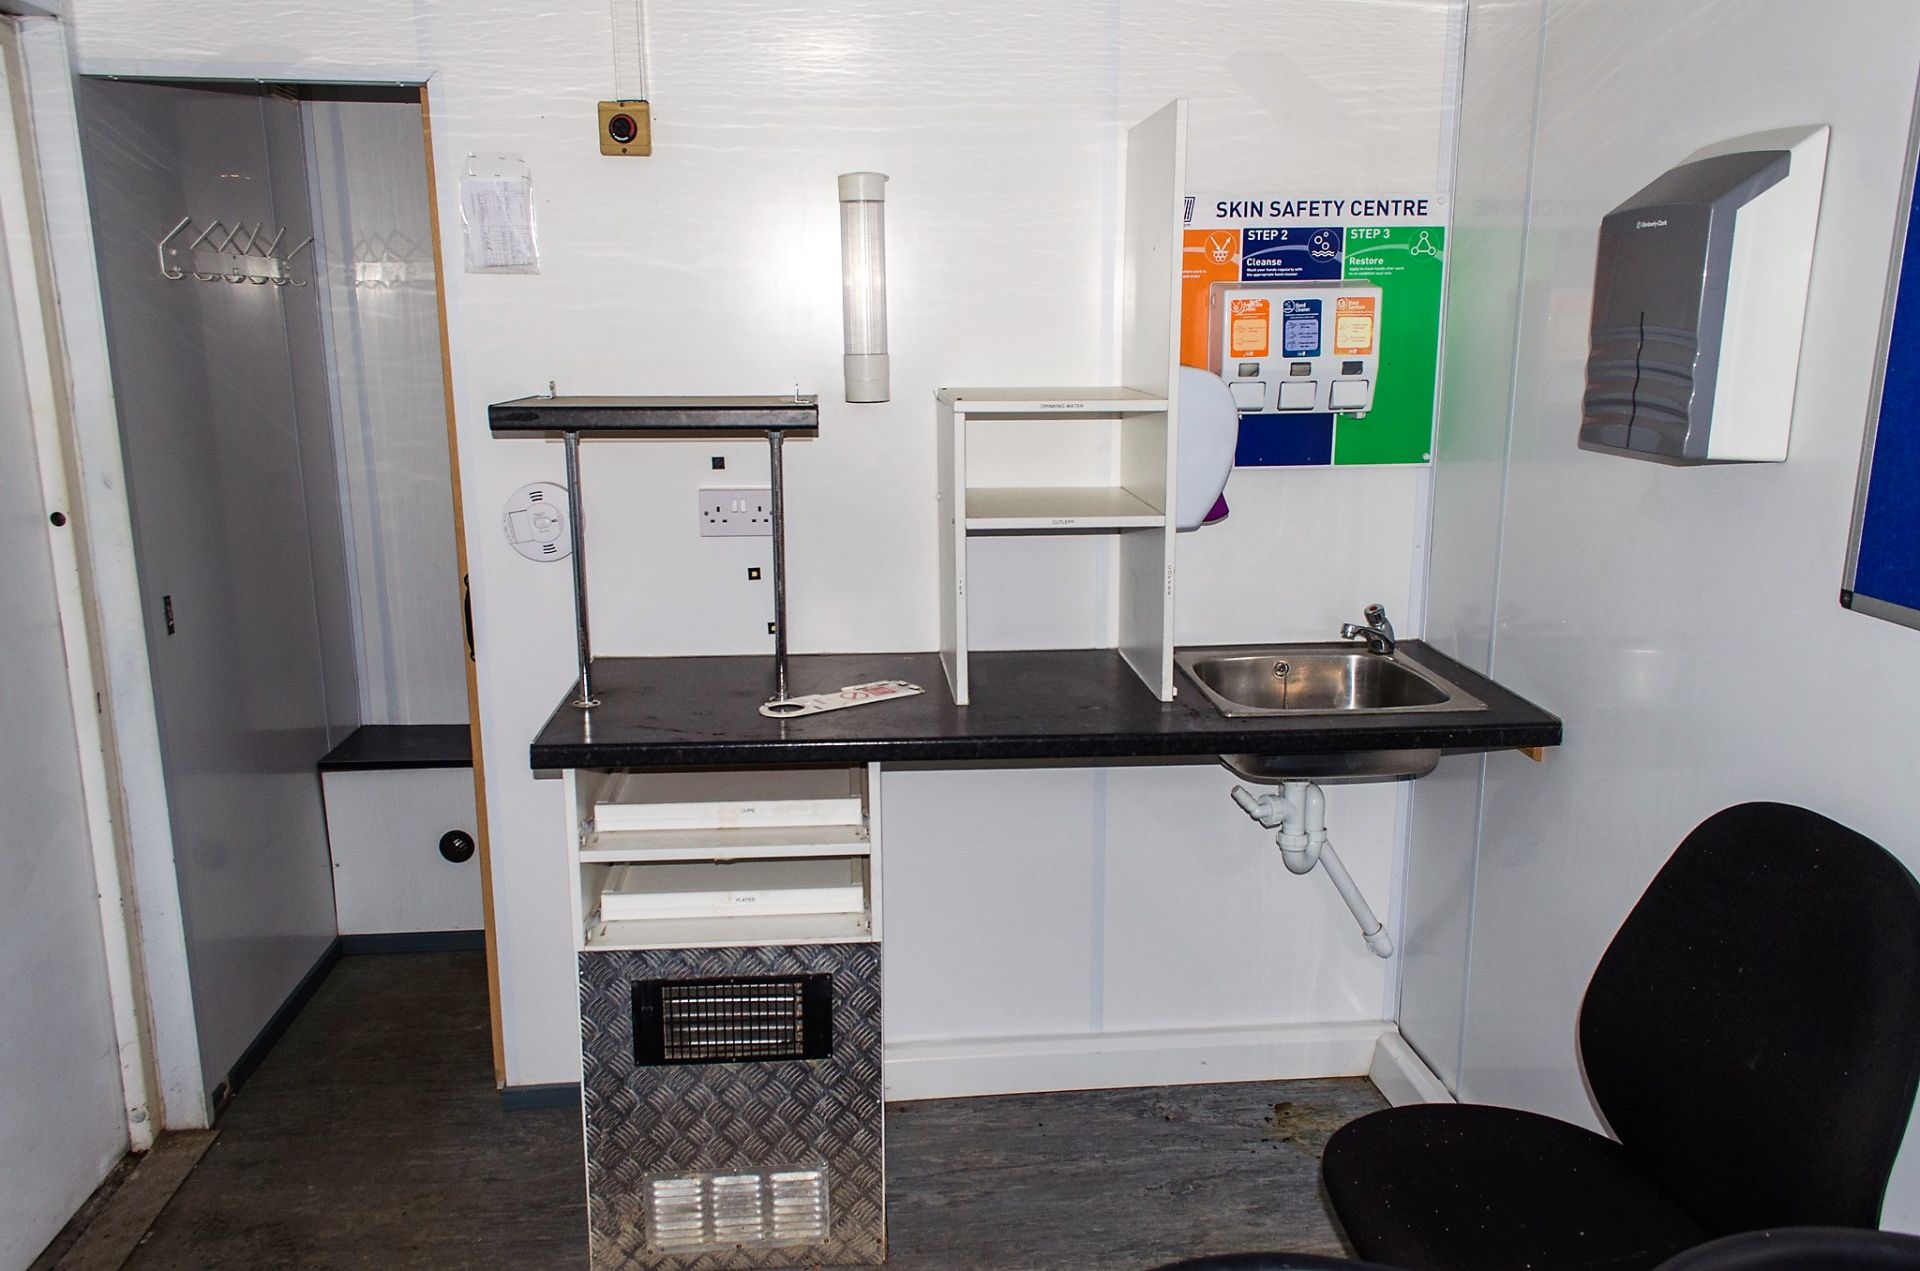 25ft x 9ft steel anti vandal welfare site unit Comprising of: Canteen area, drying room, office, - Image 7 of 12